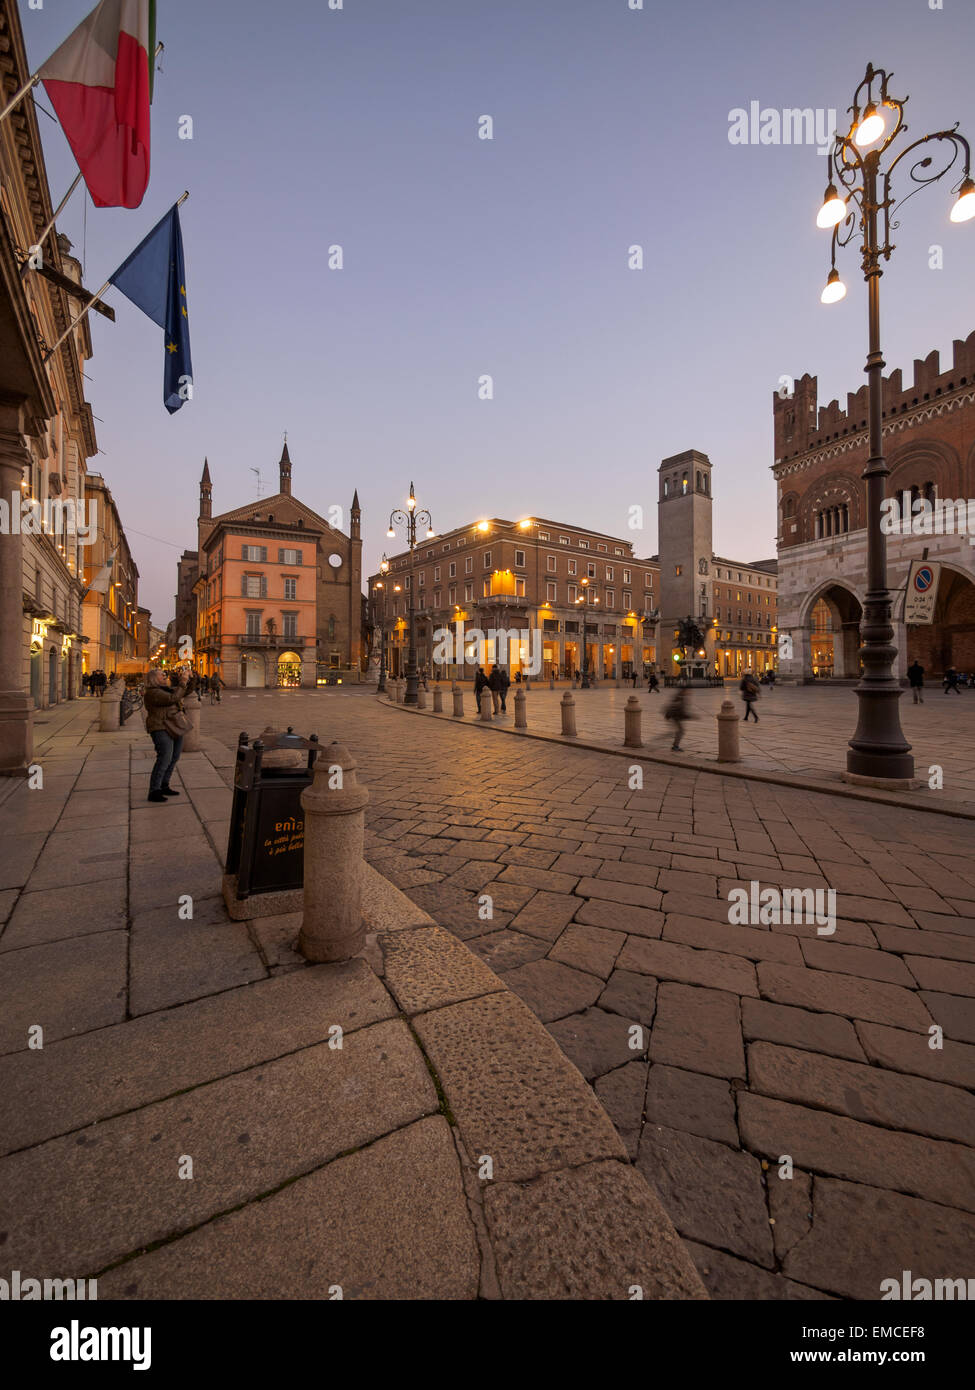 Italy, Piacenza, view to Piazza Cavalli at evening twilight Stock Photo